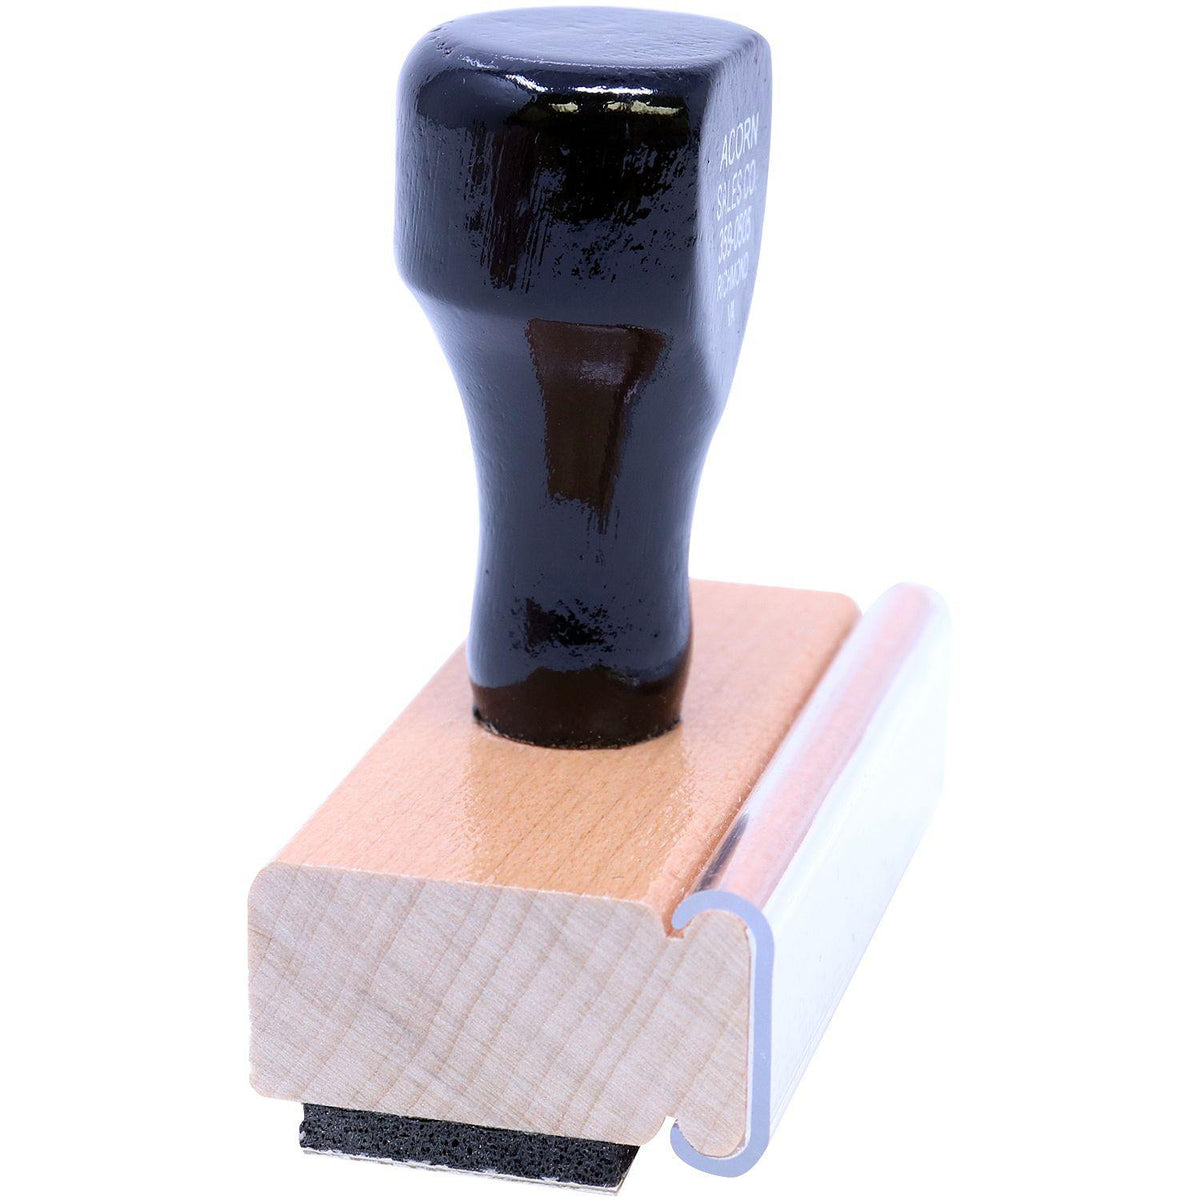 Side View of Caution Rubber Stamp at an Angle